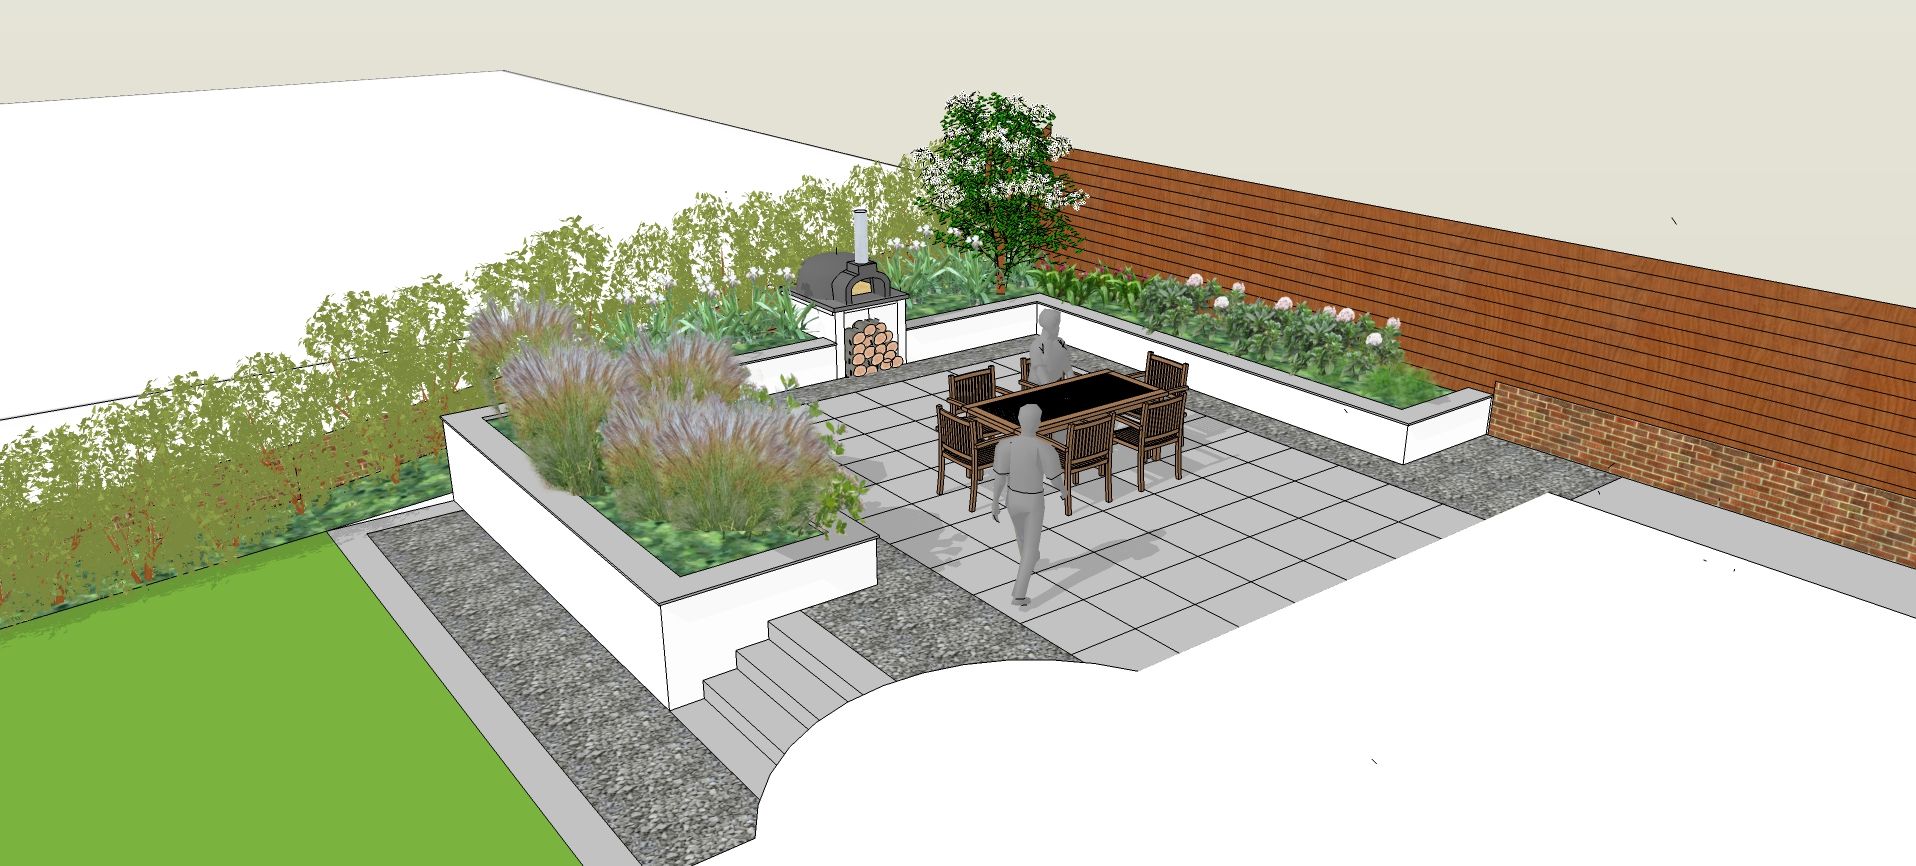 Sustainable Landscape Design with SketchUp